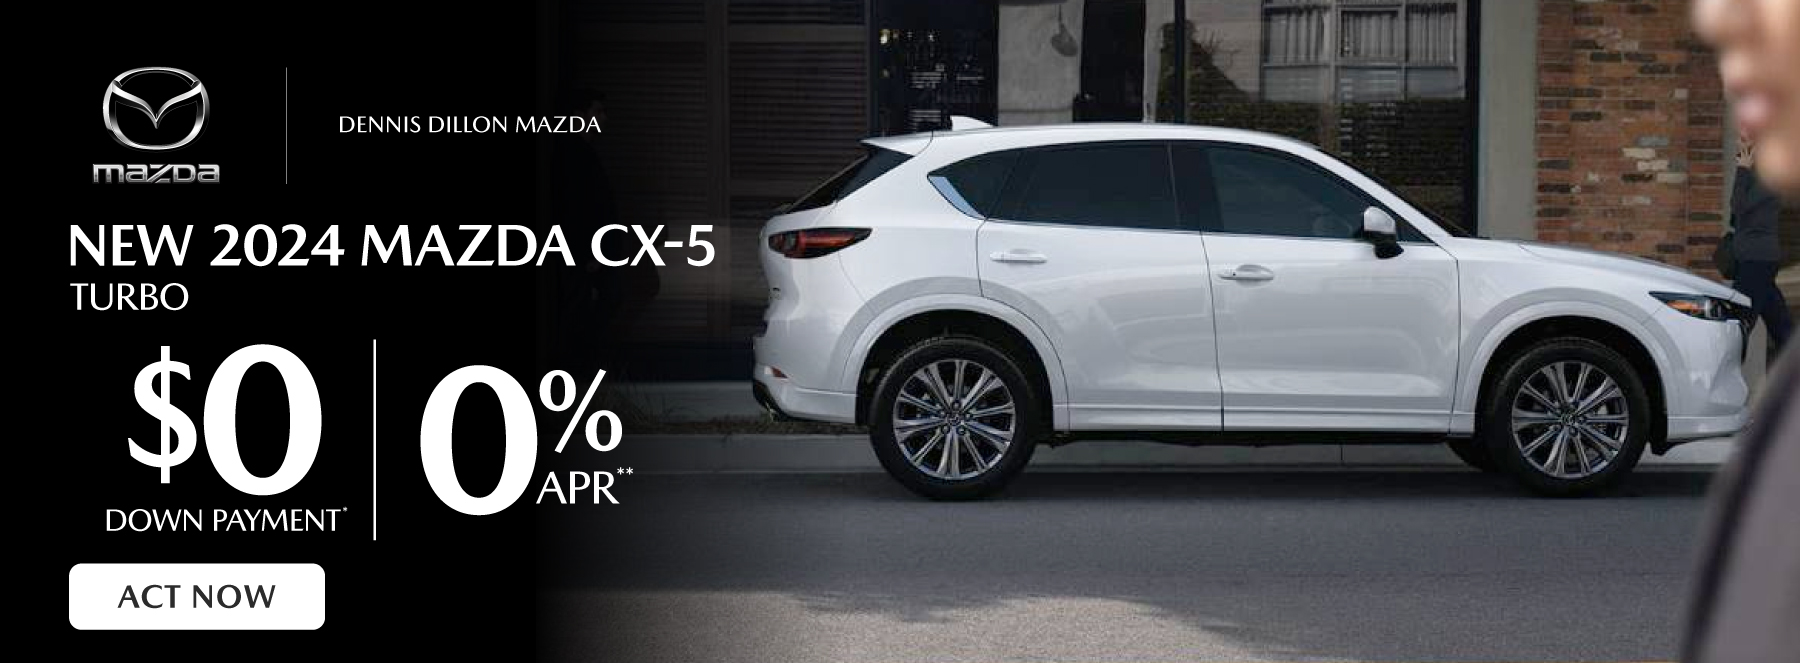 New 2024 Mazda CX-90 Turbo Preferred Plus | $499 for 36 months* $3,999 Down - Act Now